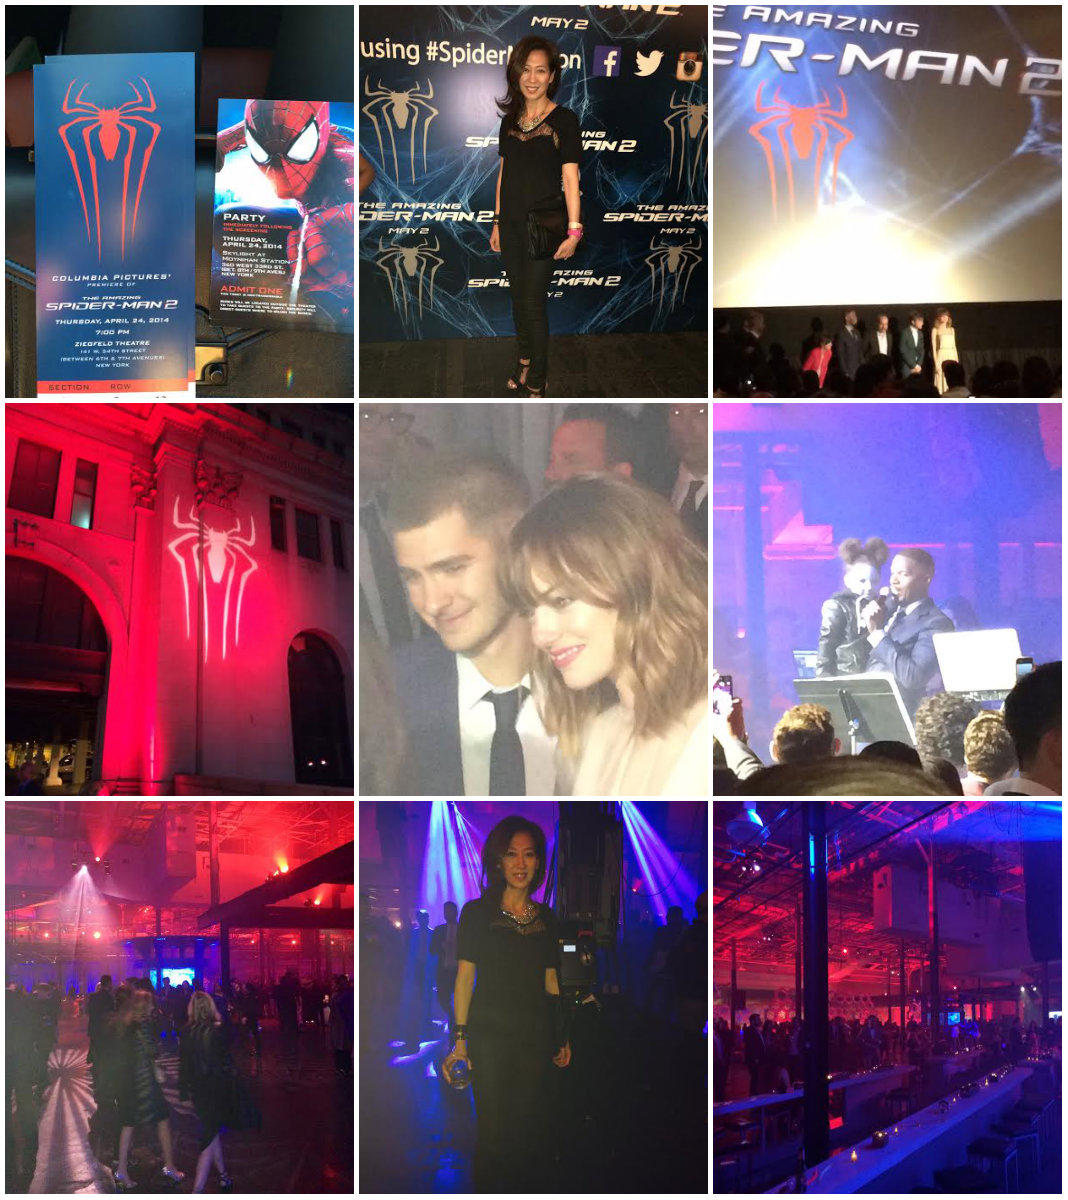 The Amazing SpiderMan 2 photo collage of movie premiere and after-party in Manhattan